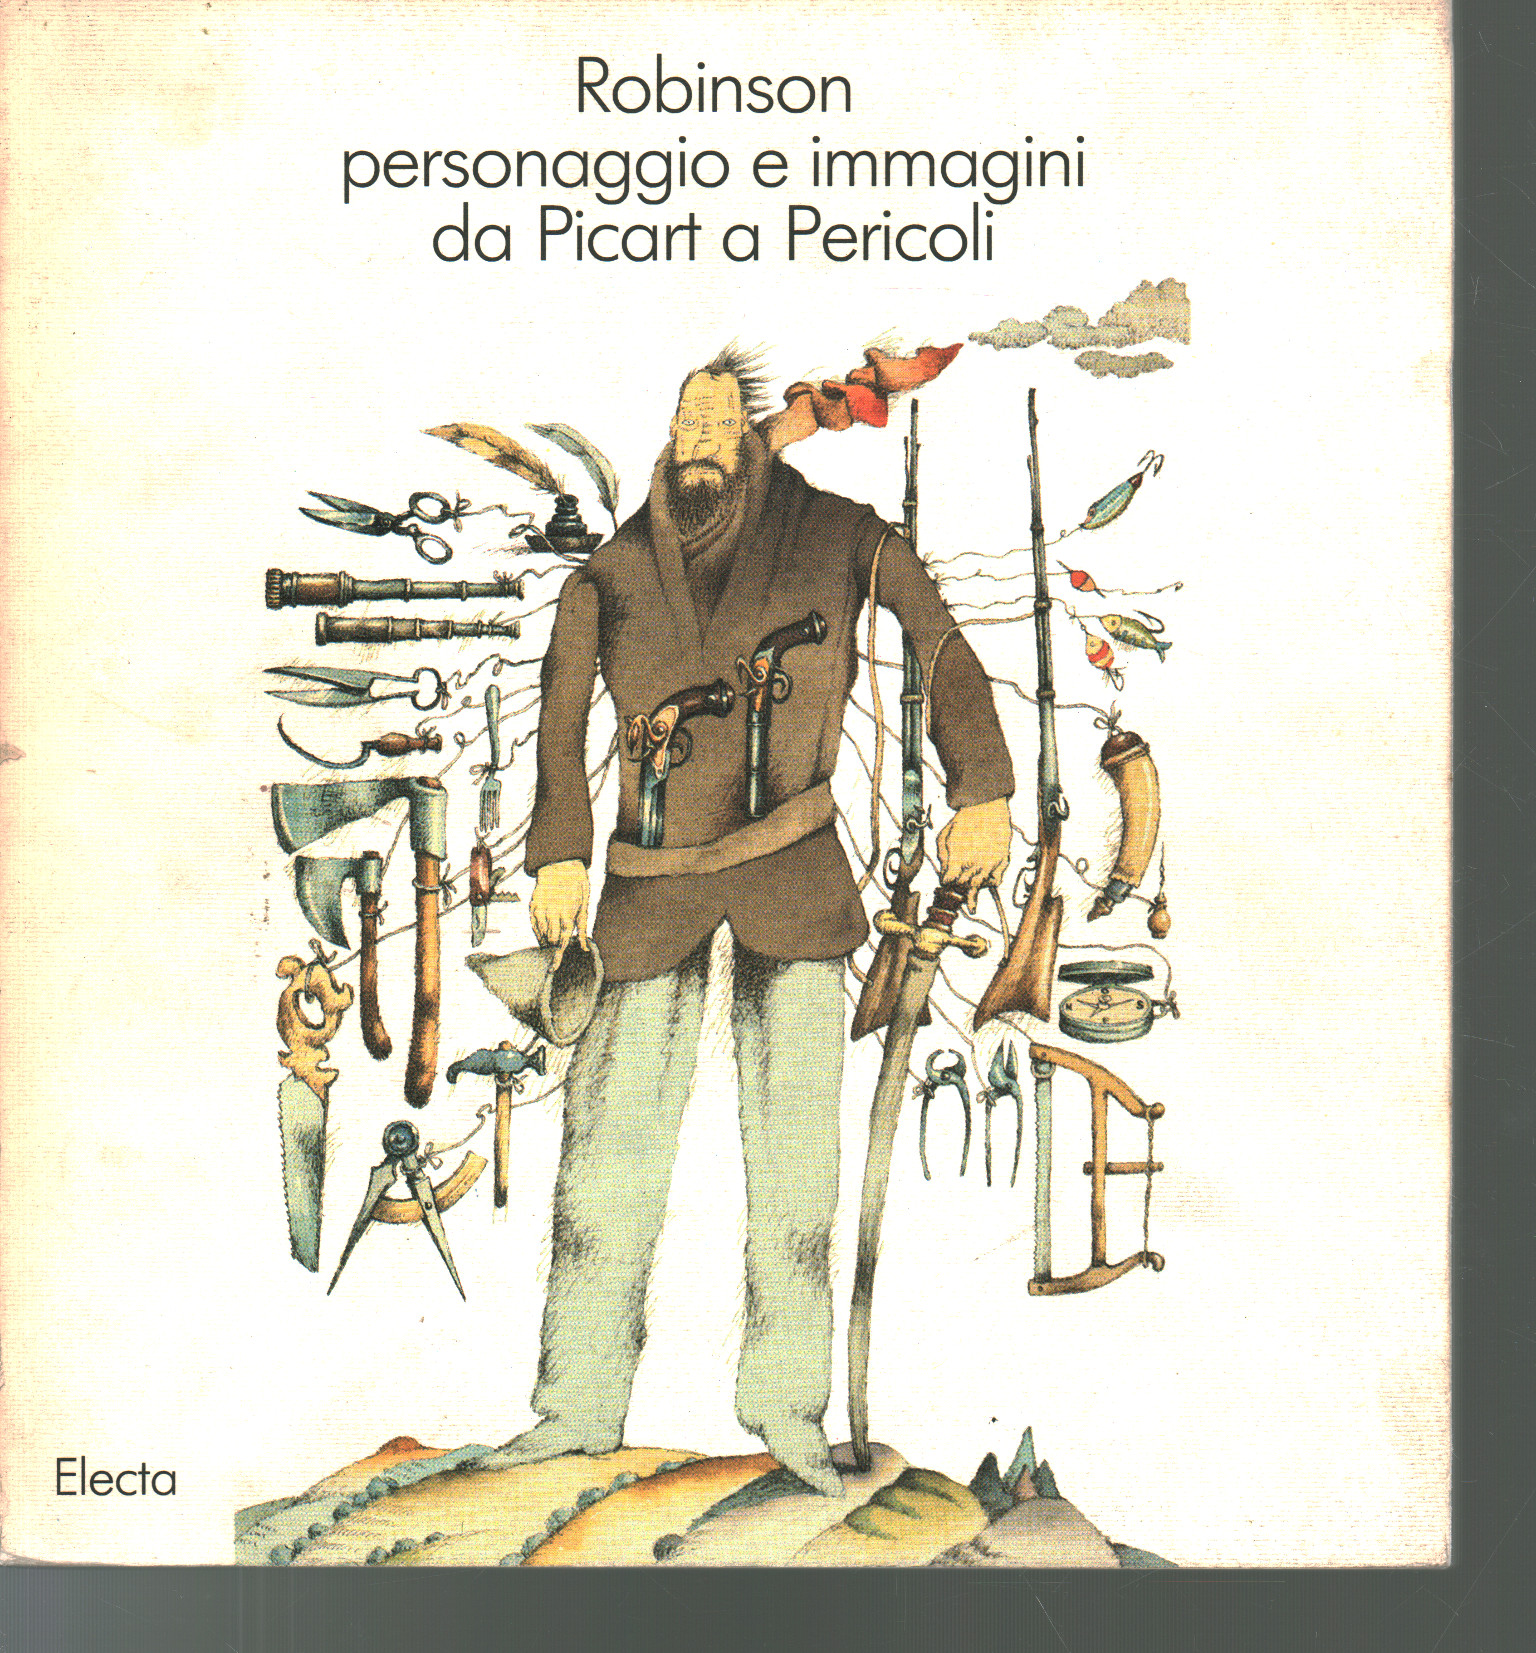 Robinson's character and image from Picart to Perico, Paolo Temeroli